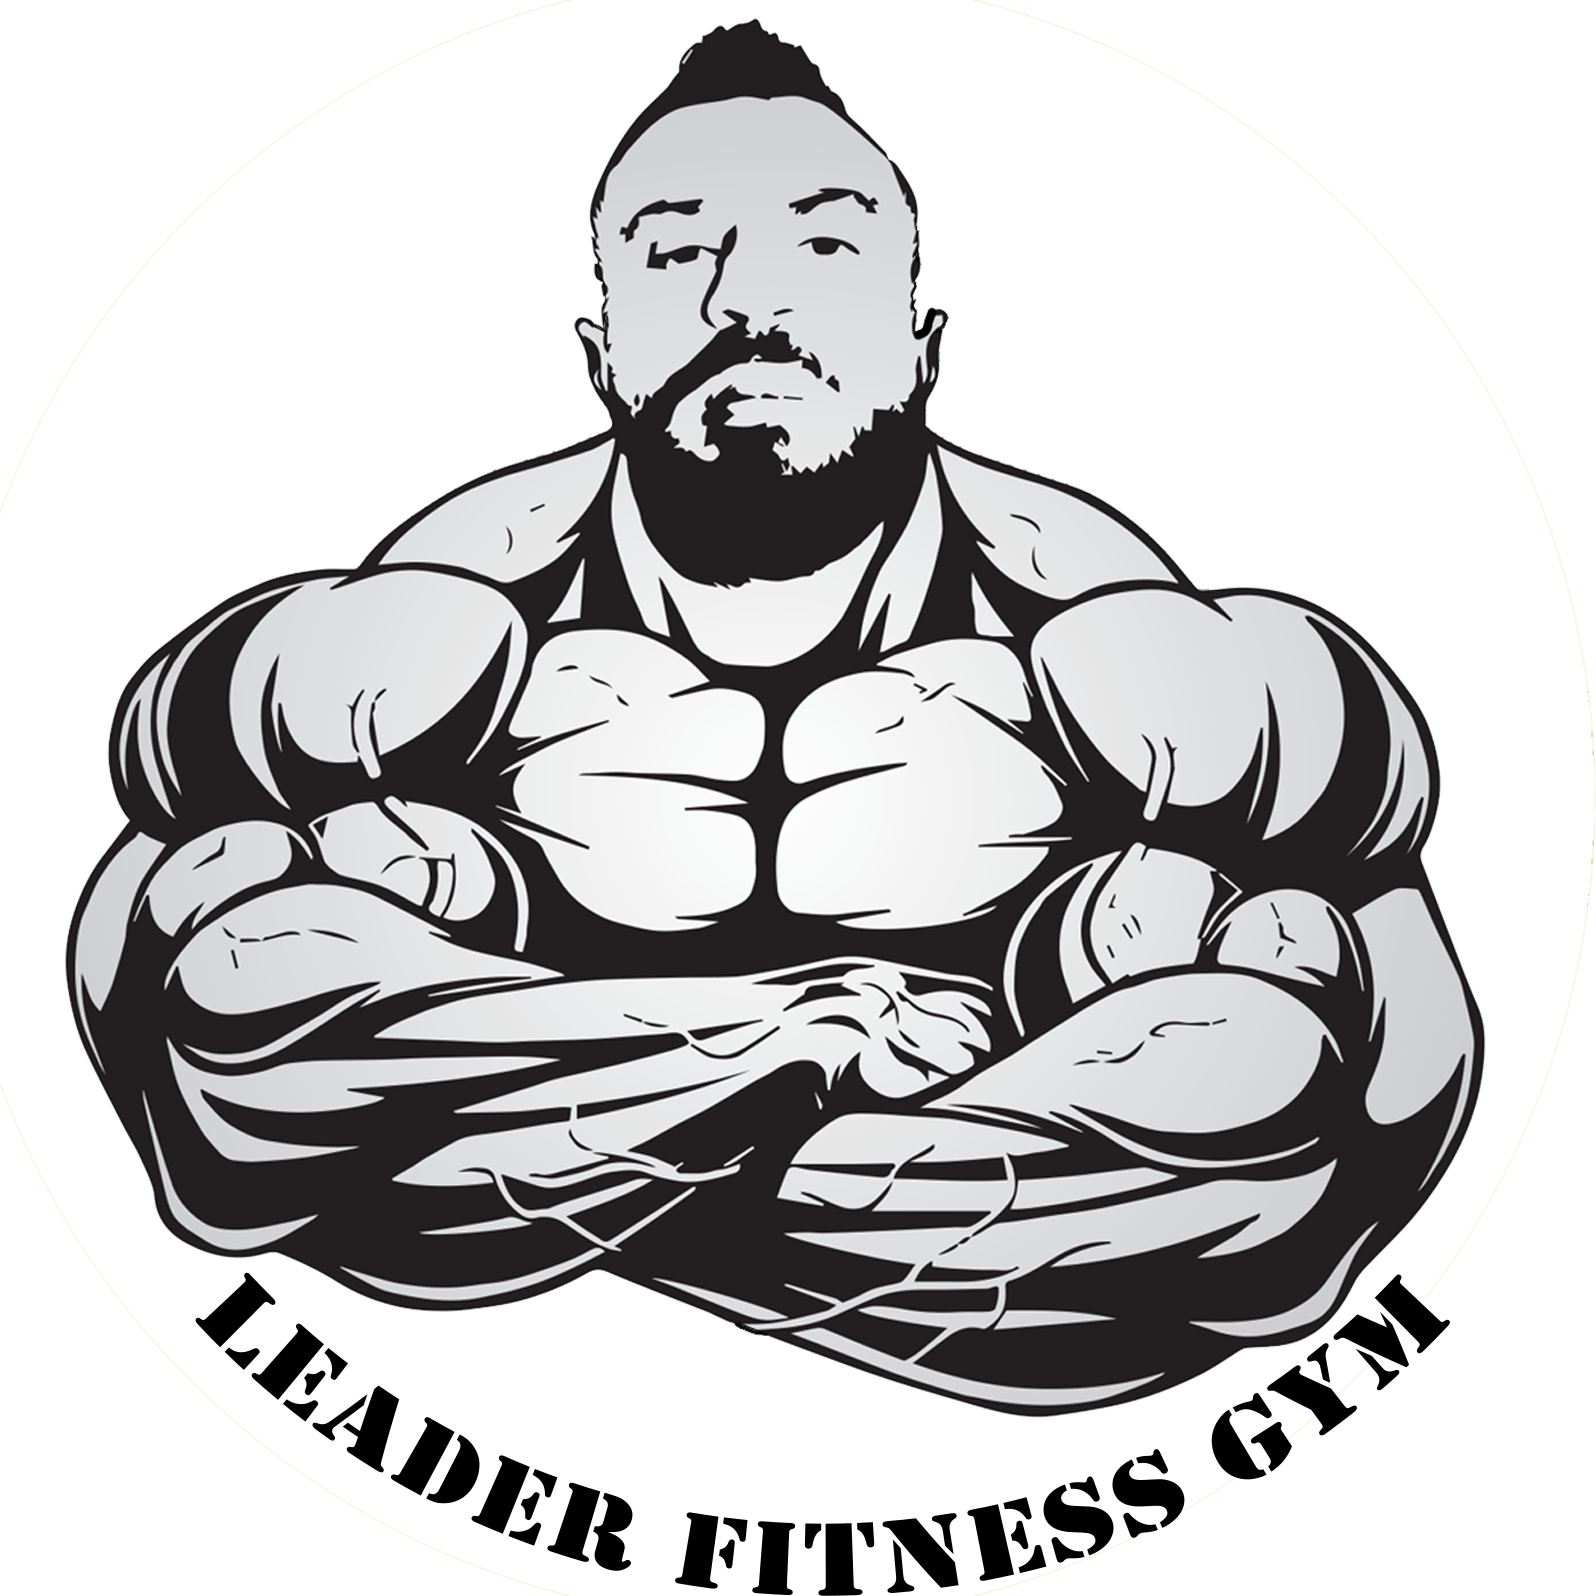 Premium Photo | Fitness club emblem badge logo or tshirt print design with  muscular man and barbell Vector illus